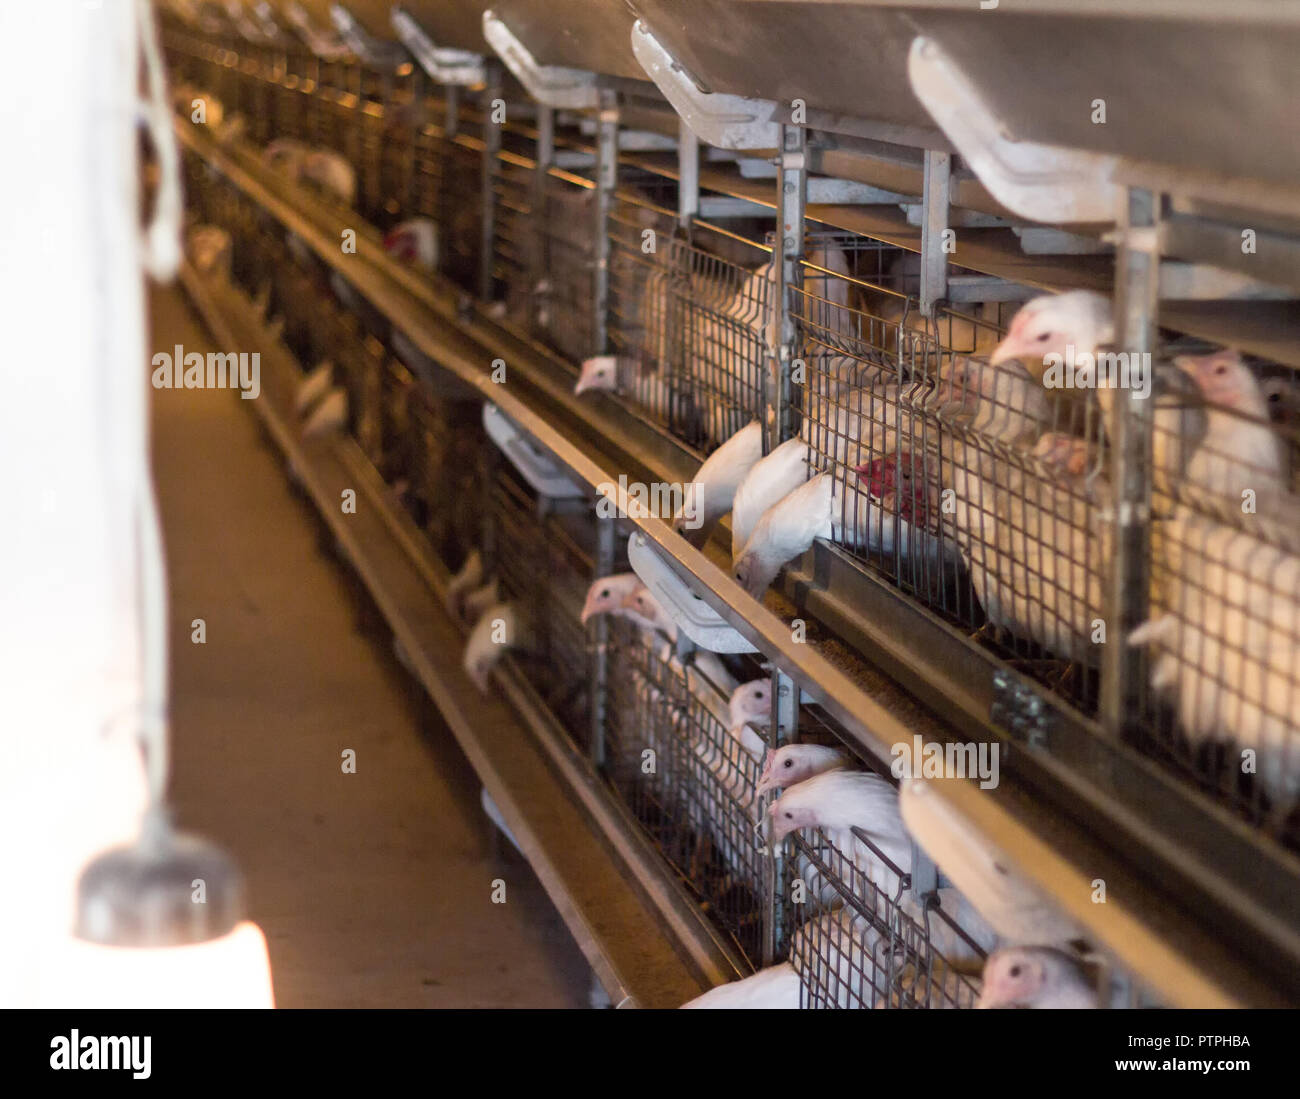 Breeding broiler chickens and chickens, broiler chickens sit behind bars in the hut, poultry house, hencoop Stock Photo